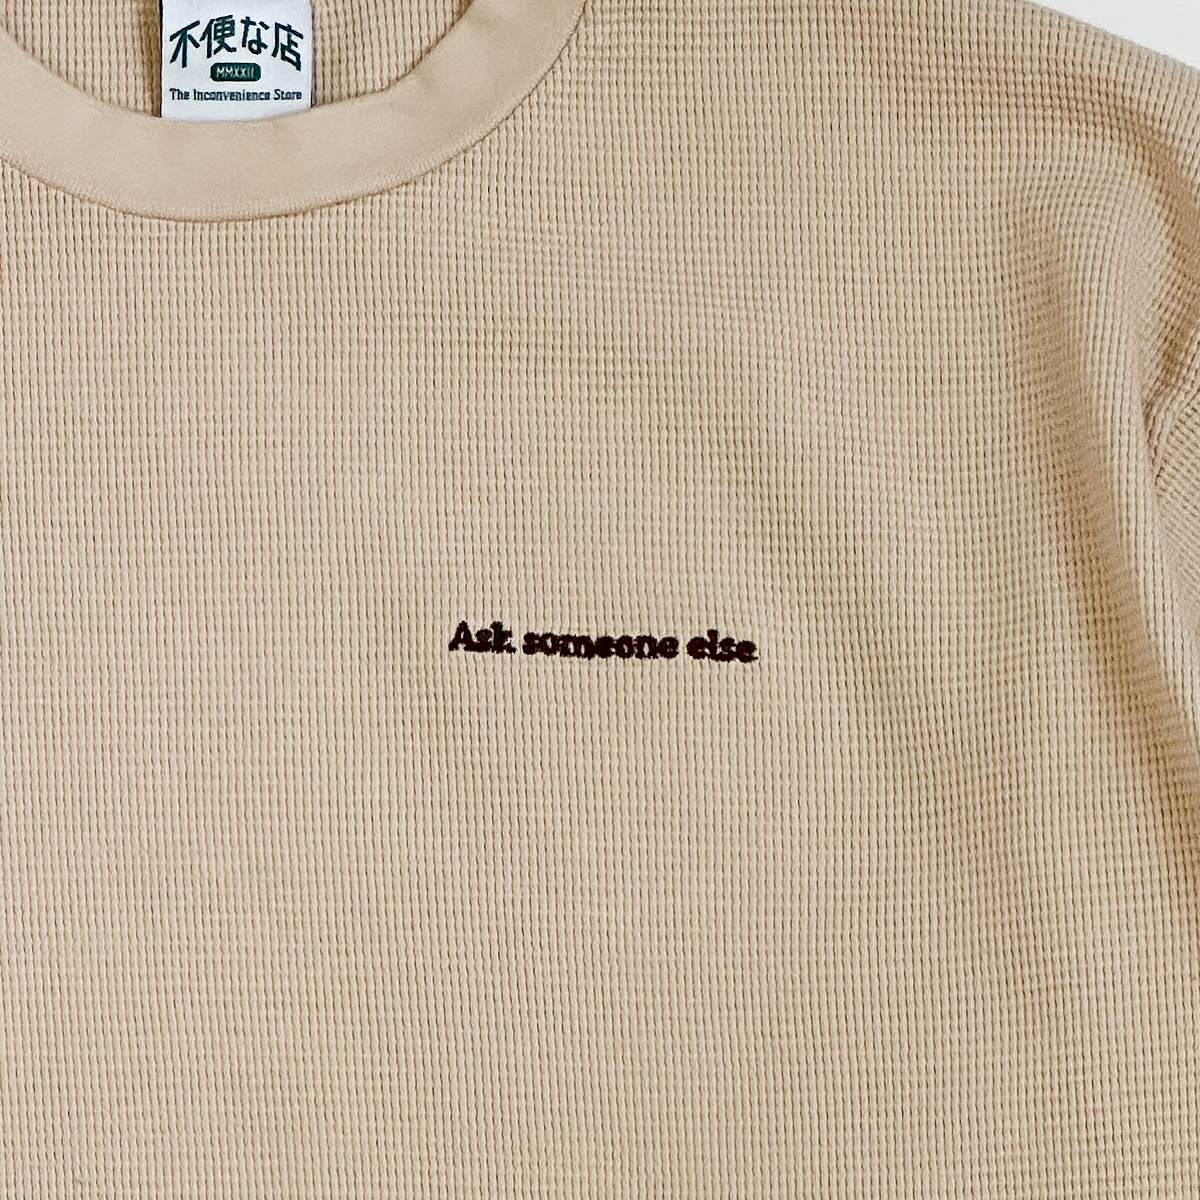 Ask someone else Thermal Crew Neck -Beige